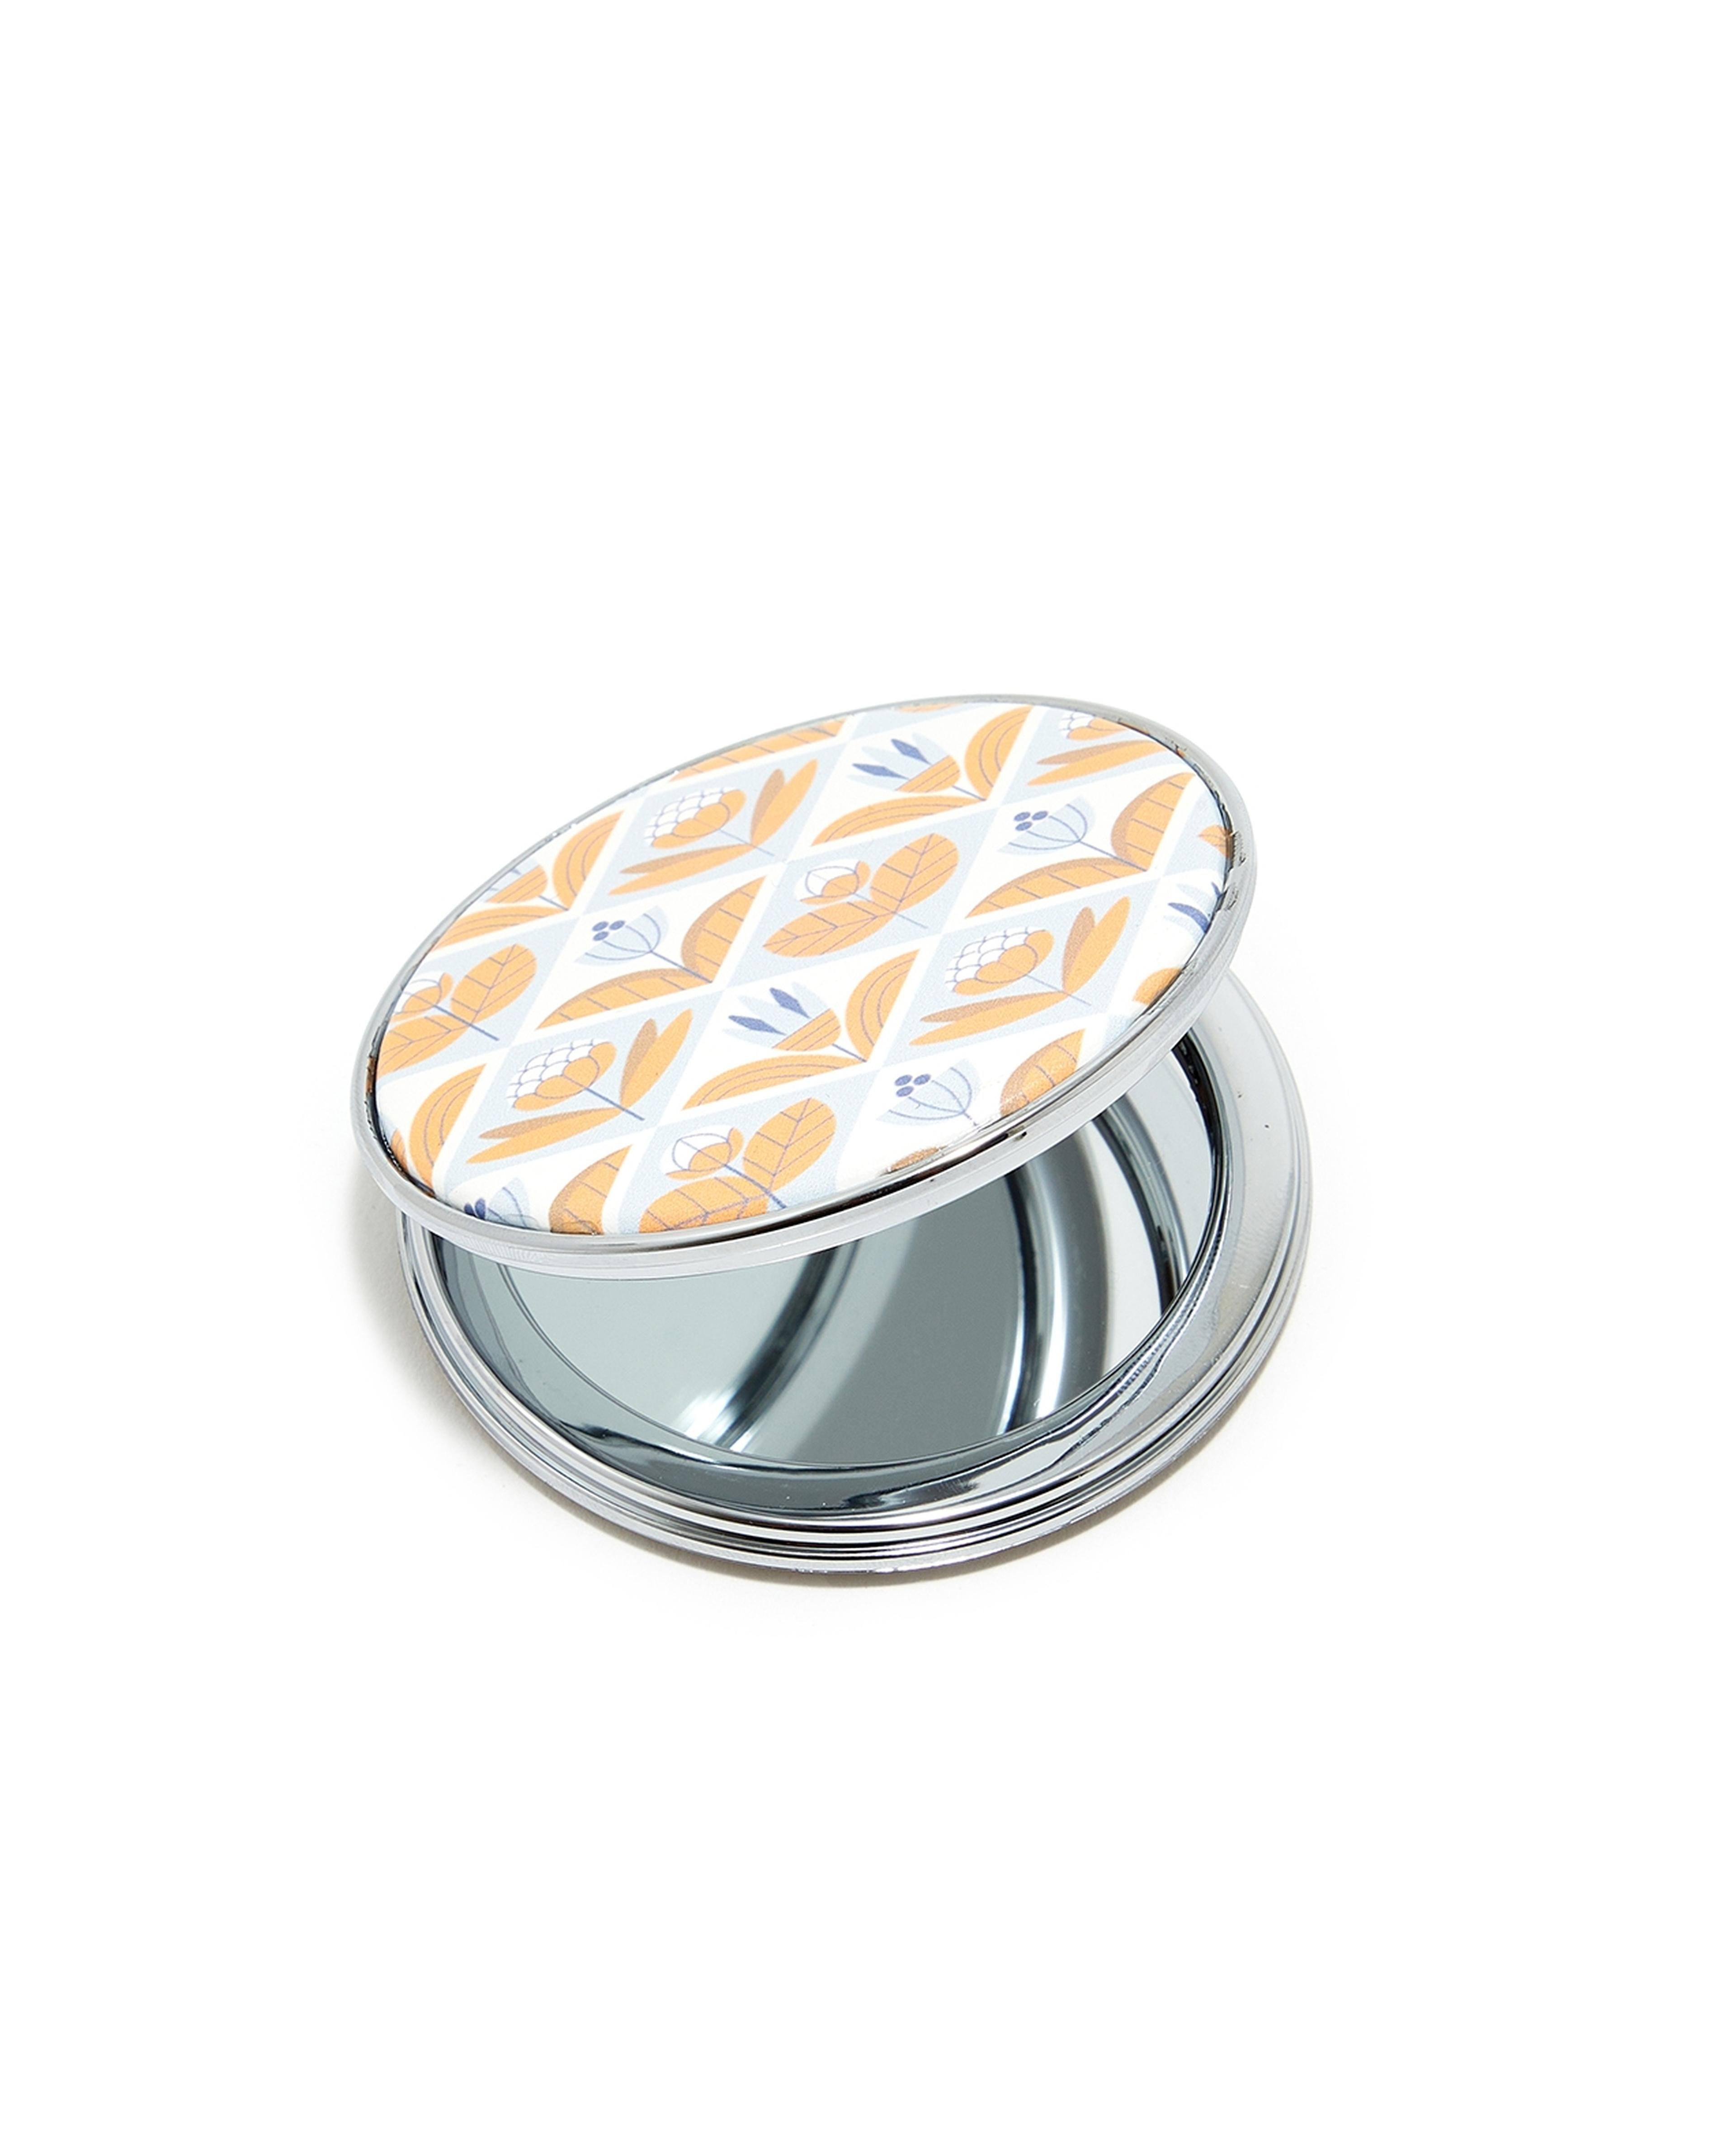 Printed Compact Mirror